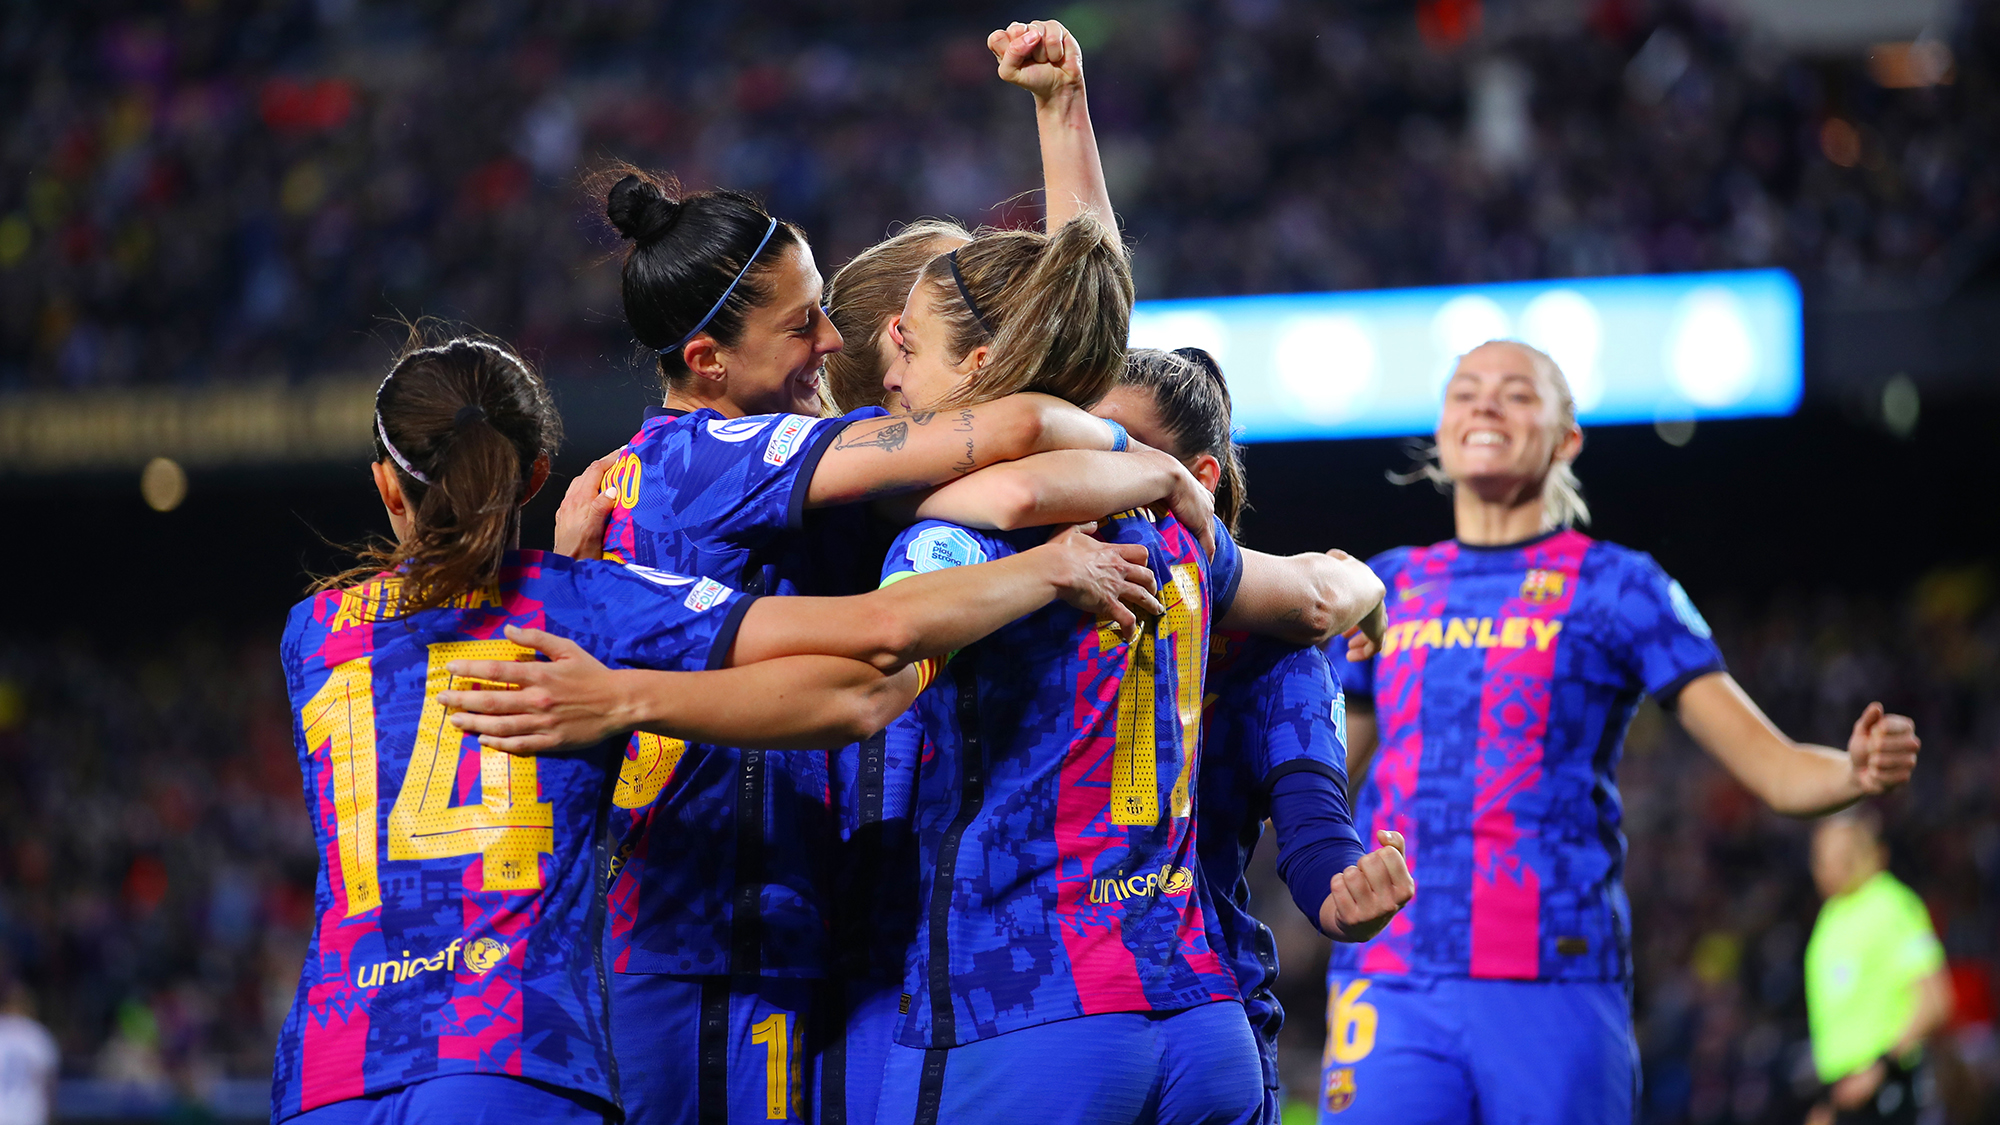 Alexia Putellas of FC Barcelona (obscured) celebrates with teammates after scoring their team's fourth goal during the UEFA Women's Champions League Quarter Final Second Leg match between FC Barcelona and Real Madrid at Camp Nou on March 30, 2022 in Barcelona, Spain.